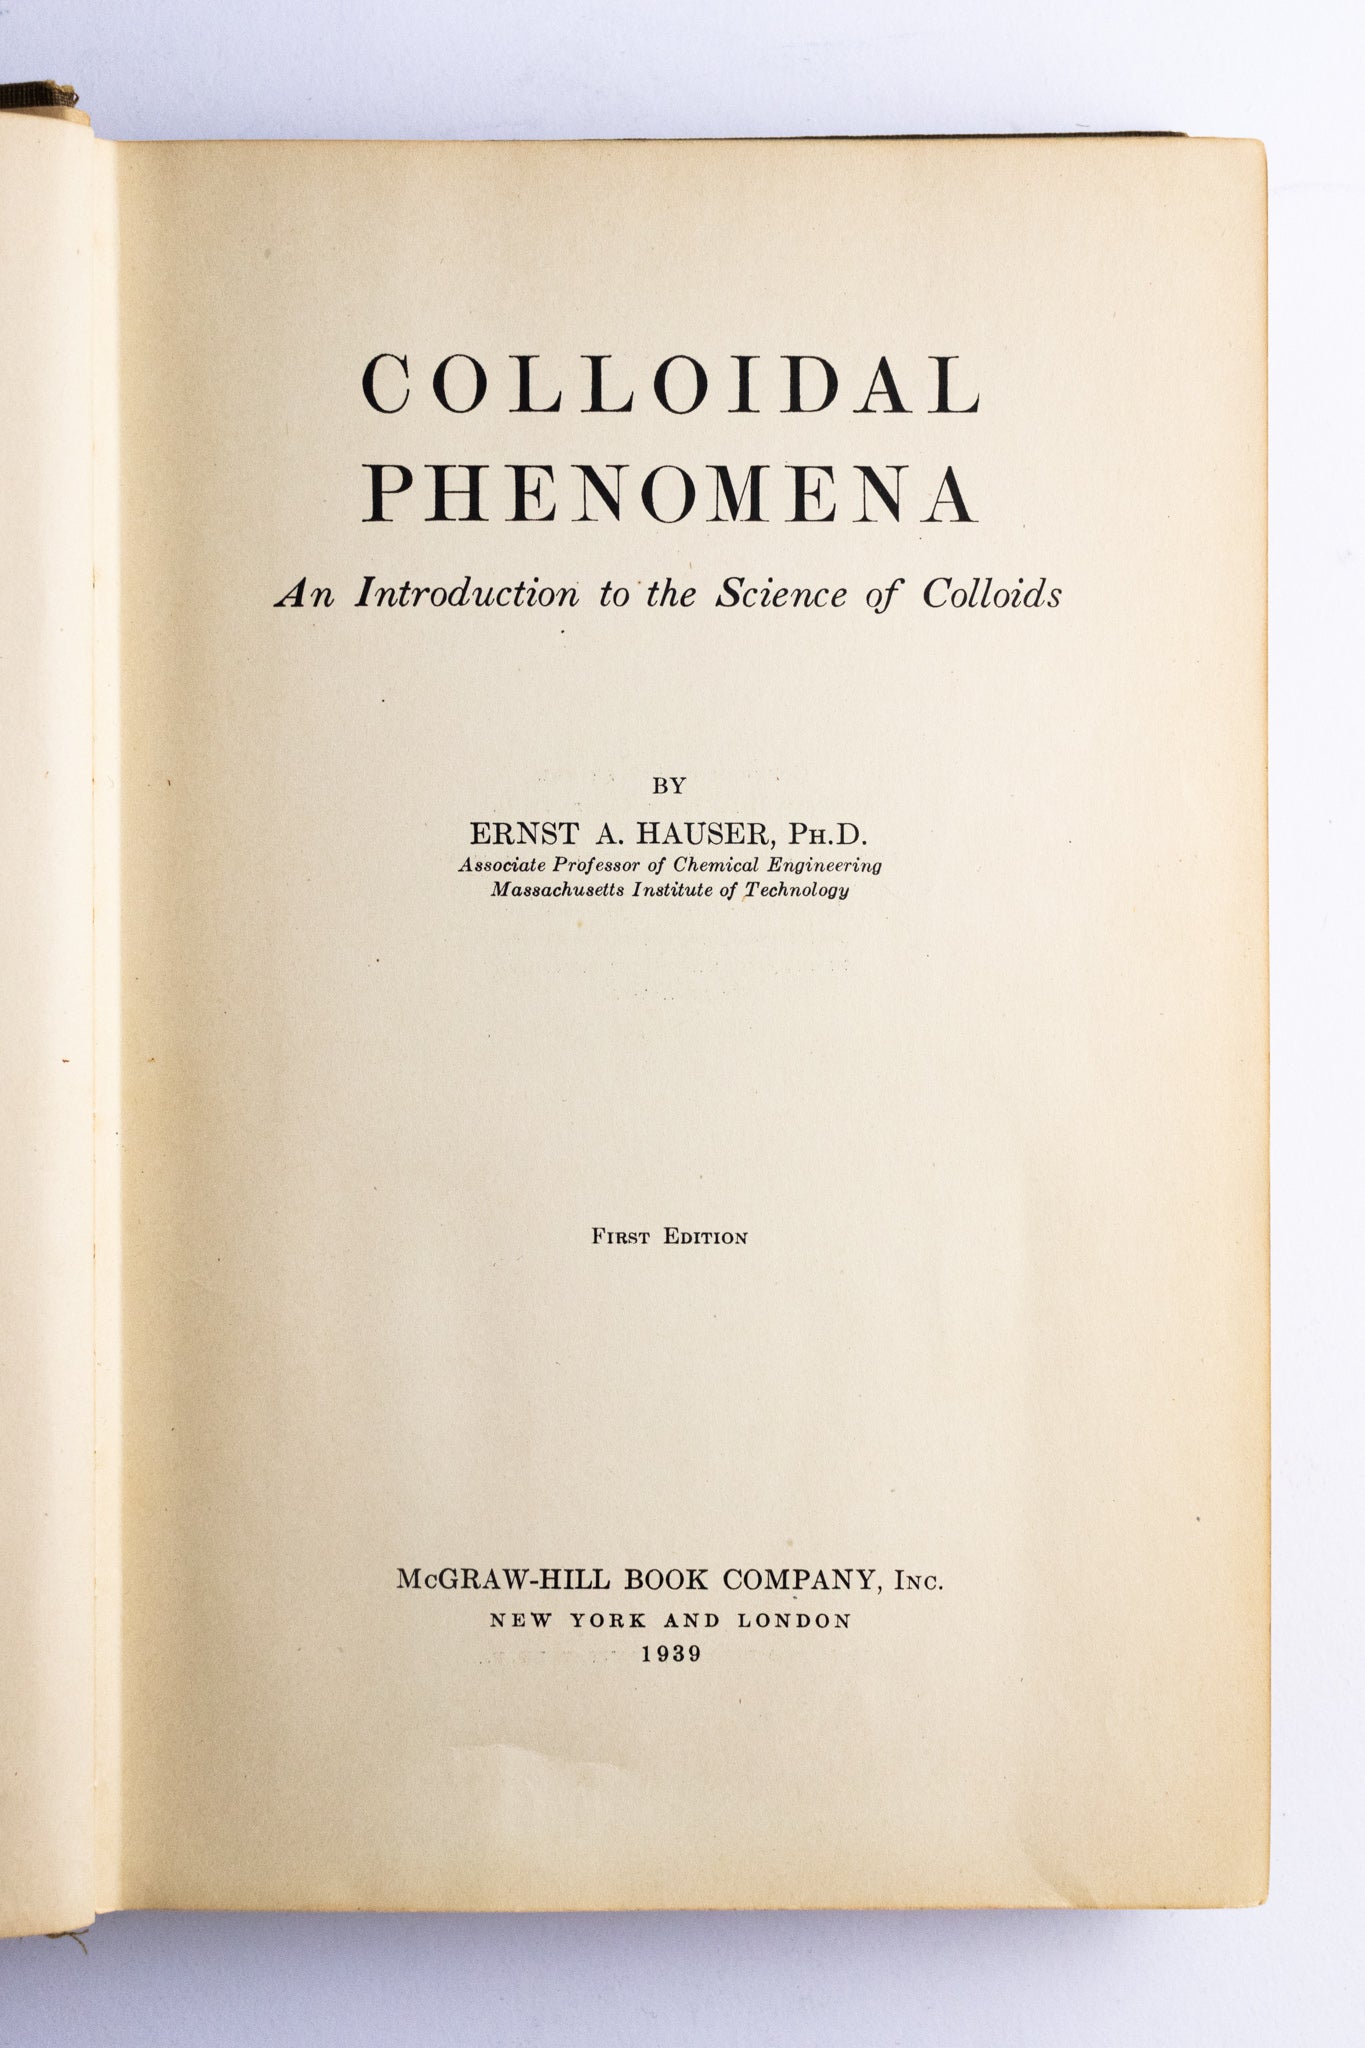 Colloidal Phenomena: An Introduction to the Science of Colloids